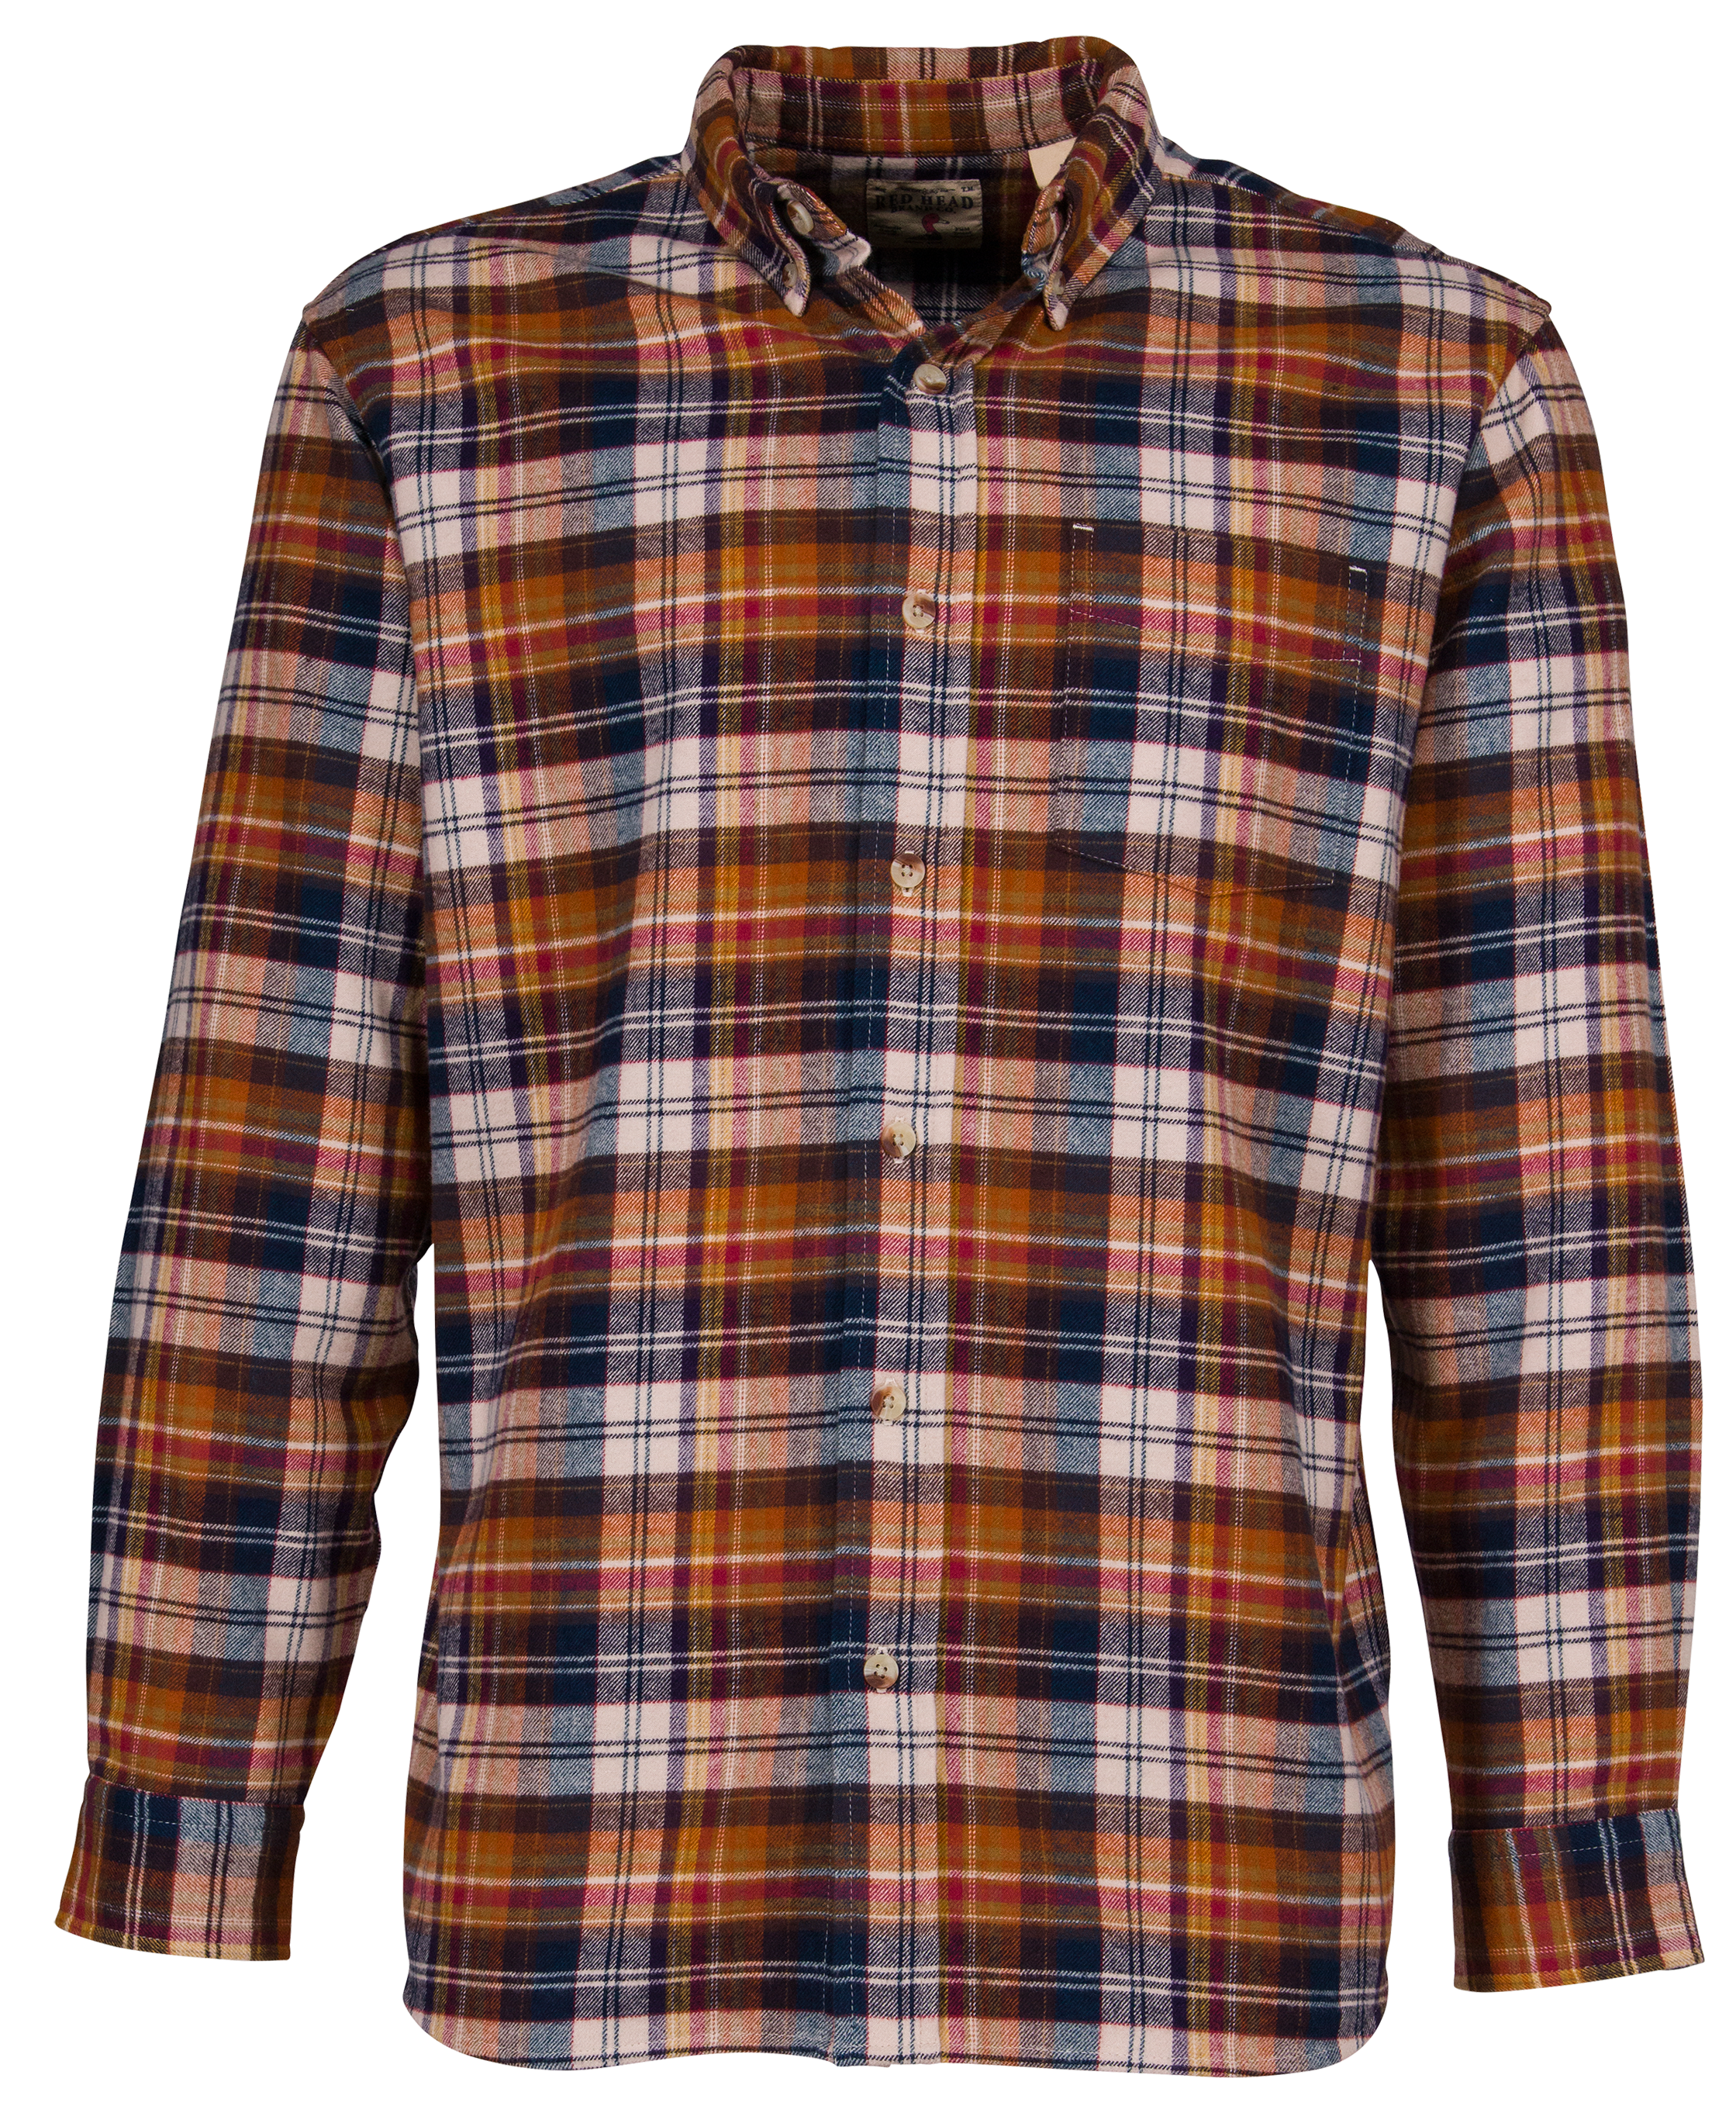 Redhead Ultimate Flannel Long-Sleeve Shirt for Men - True Red Plaid - XL